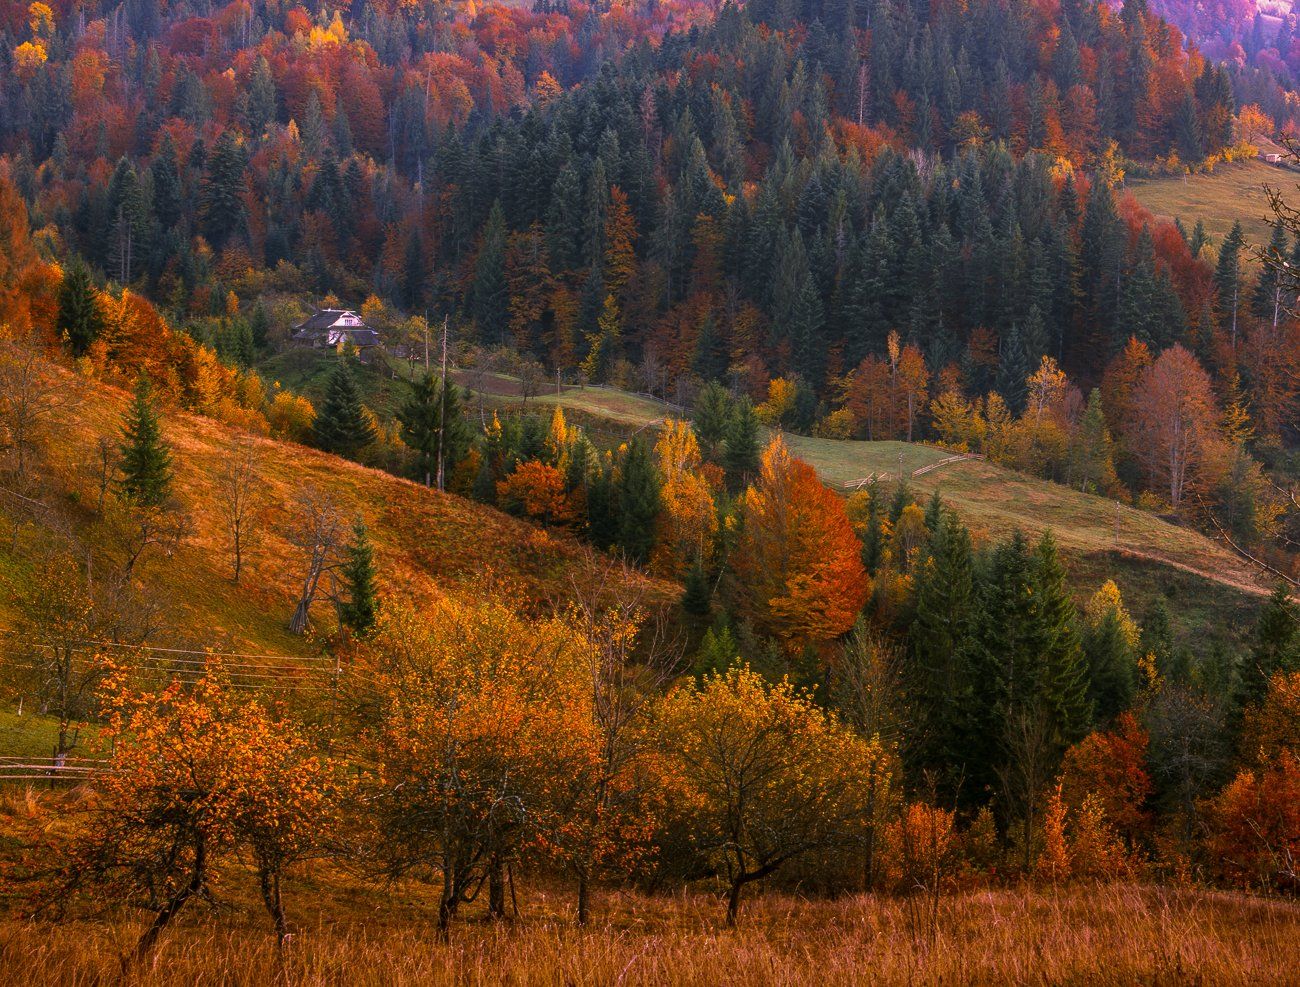 autumn, carpathian, colorful, countryside, fall, field, foliage, forest, hill, house, land, landscape, meadow, morning, mountain, mountains, nature, outdoor, pasture, picturesque, red, rural, scenery, season, tranquil, travel, tree, view, wood, yellow, Арсений Герасименко